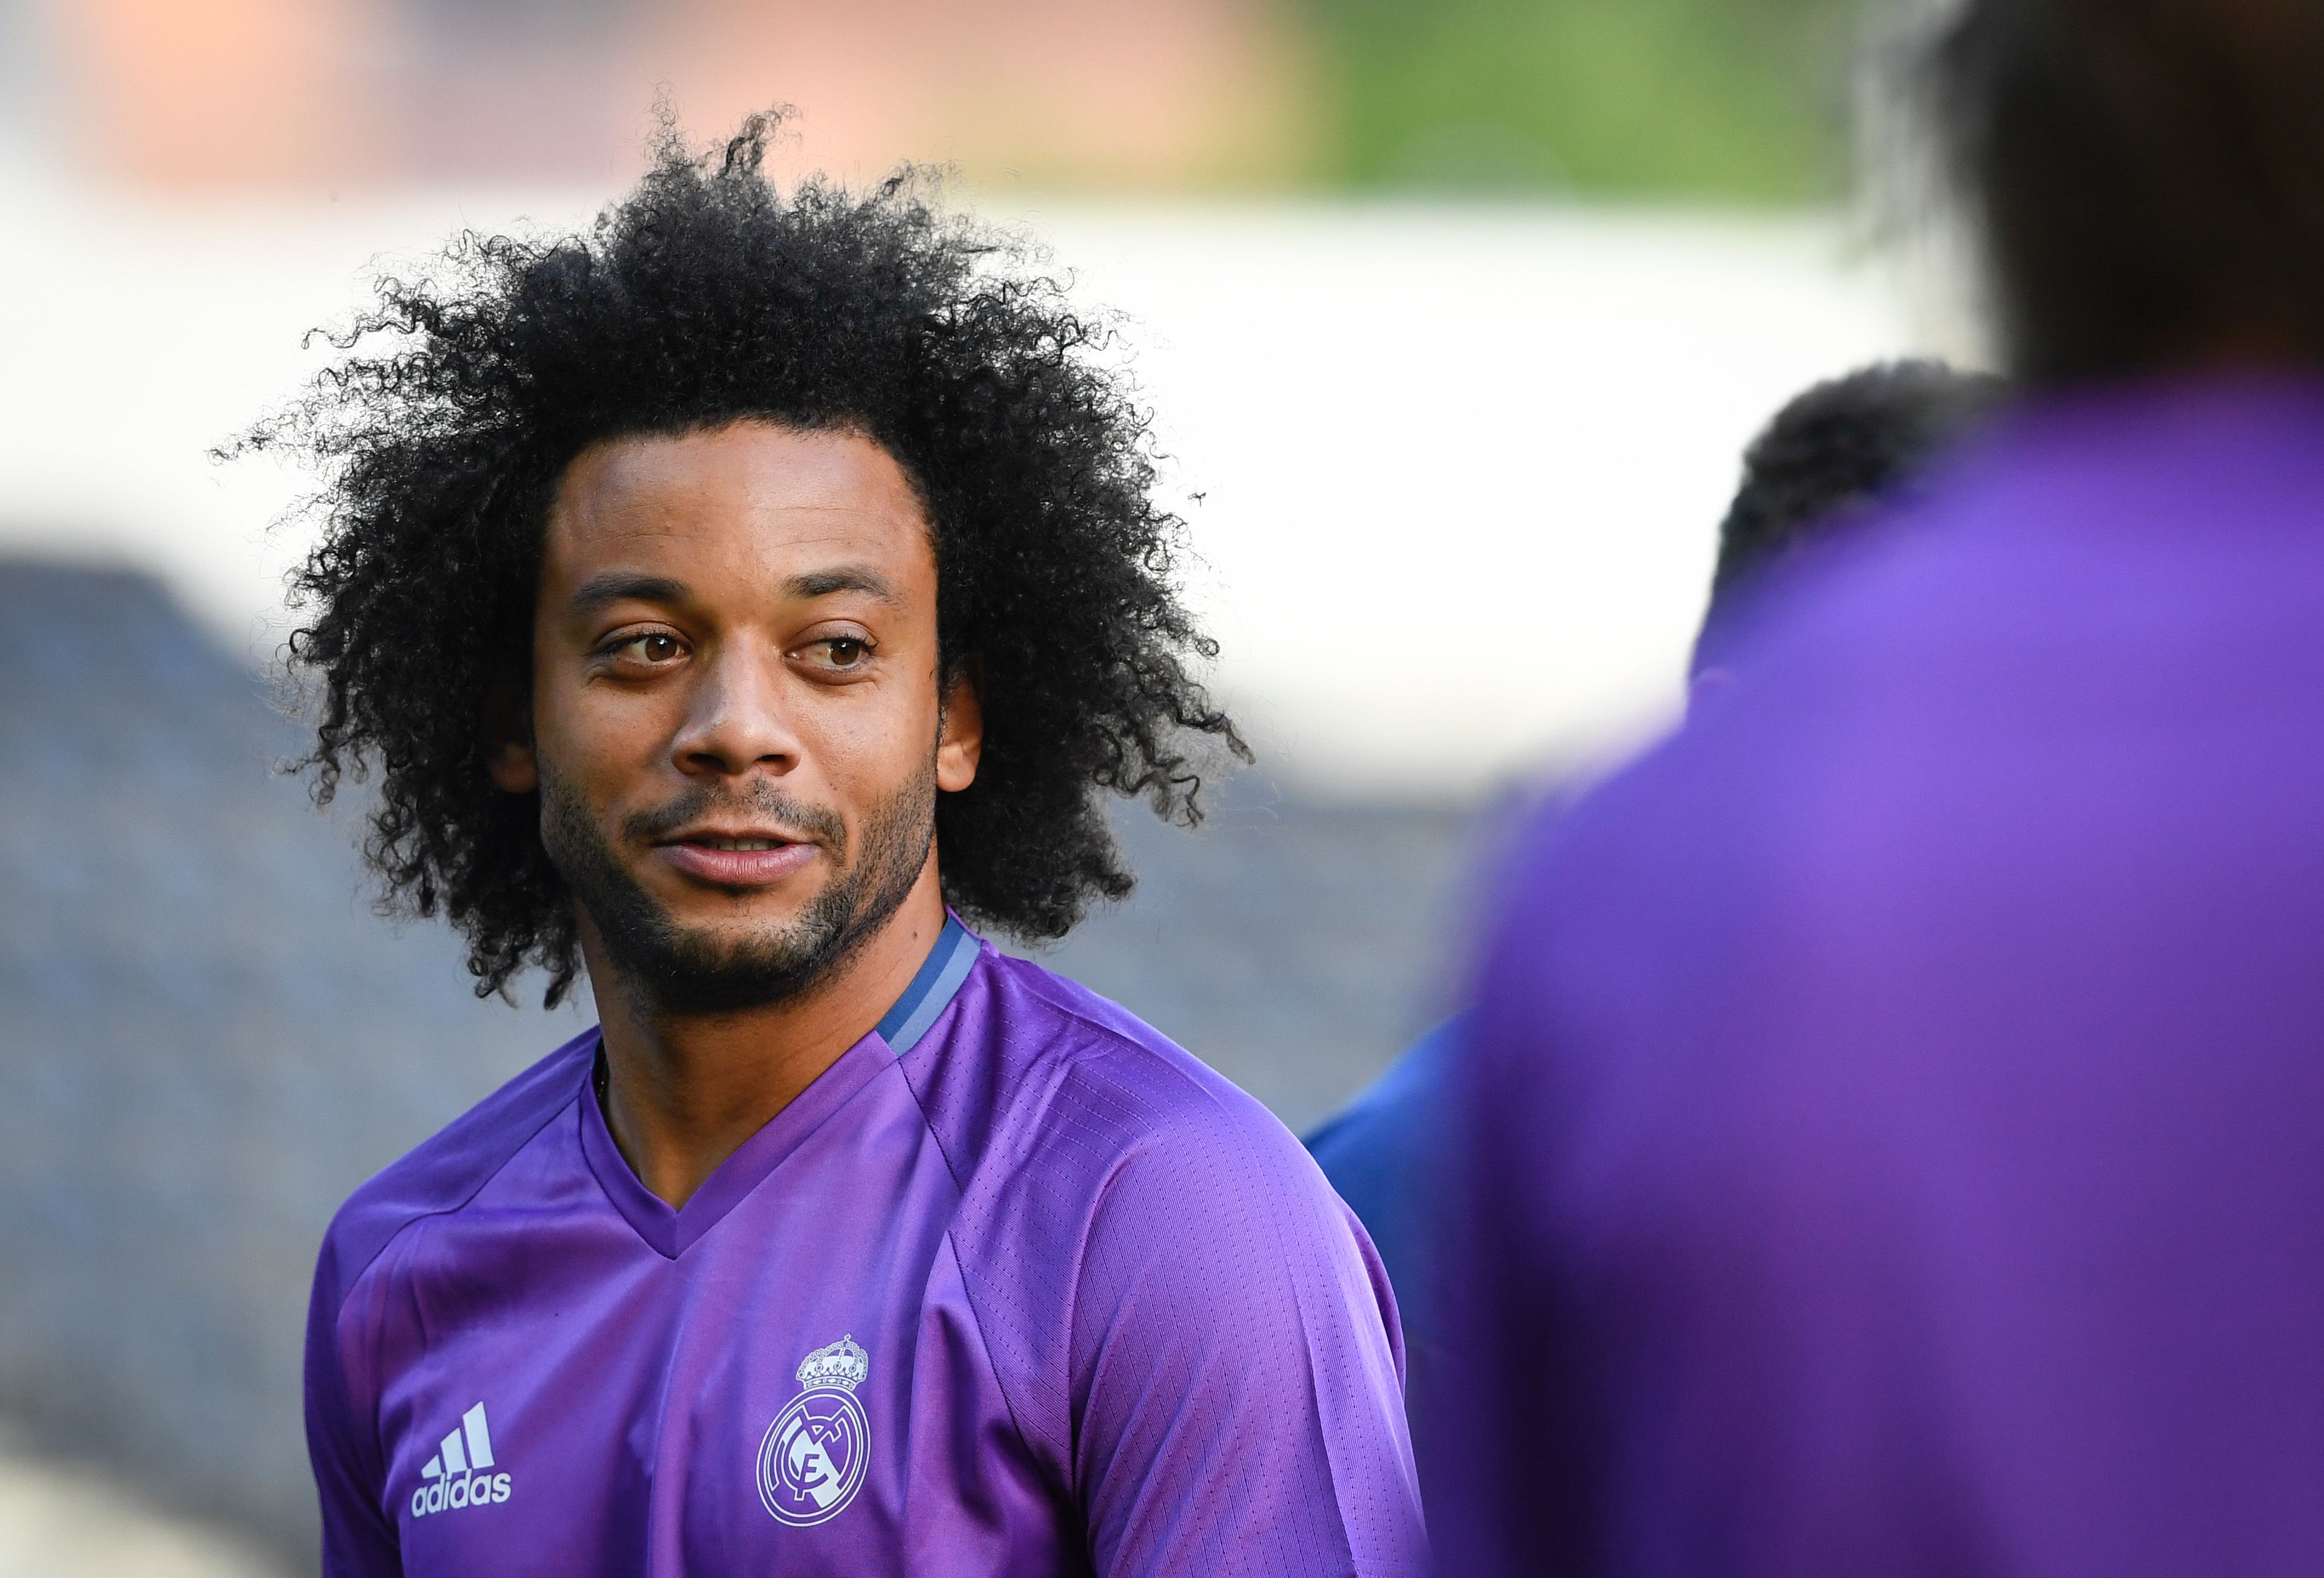 Real Madrid's Brazilian defender Marcelo takes part in a training session on August 8, 2016 at the Lerkendal Stadion in Trondheim, on the eve of the UEFA Super Cup final football match between Real Madrid CF and Sevilla FC. / AFP / JONATHAN NACKSTRAND        (Photo credit should read JONATHAN NACKSTRAND/AFP/Getty Images)